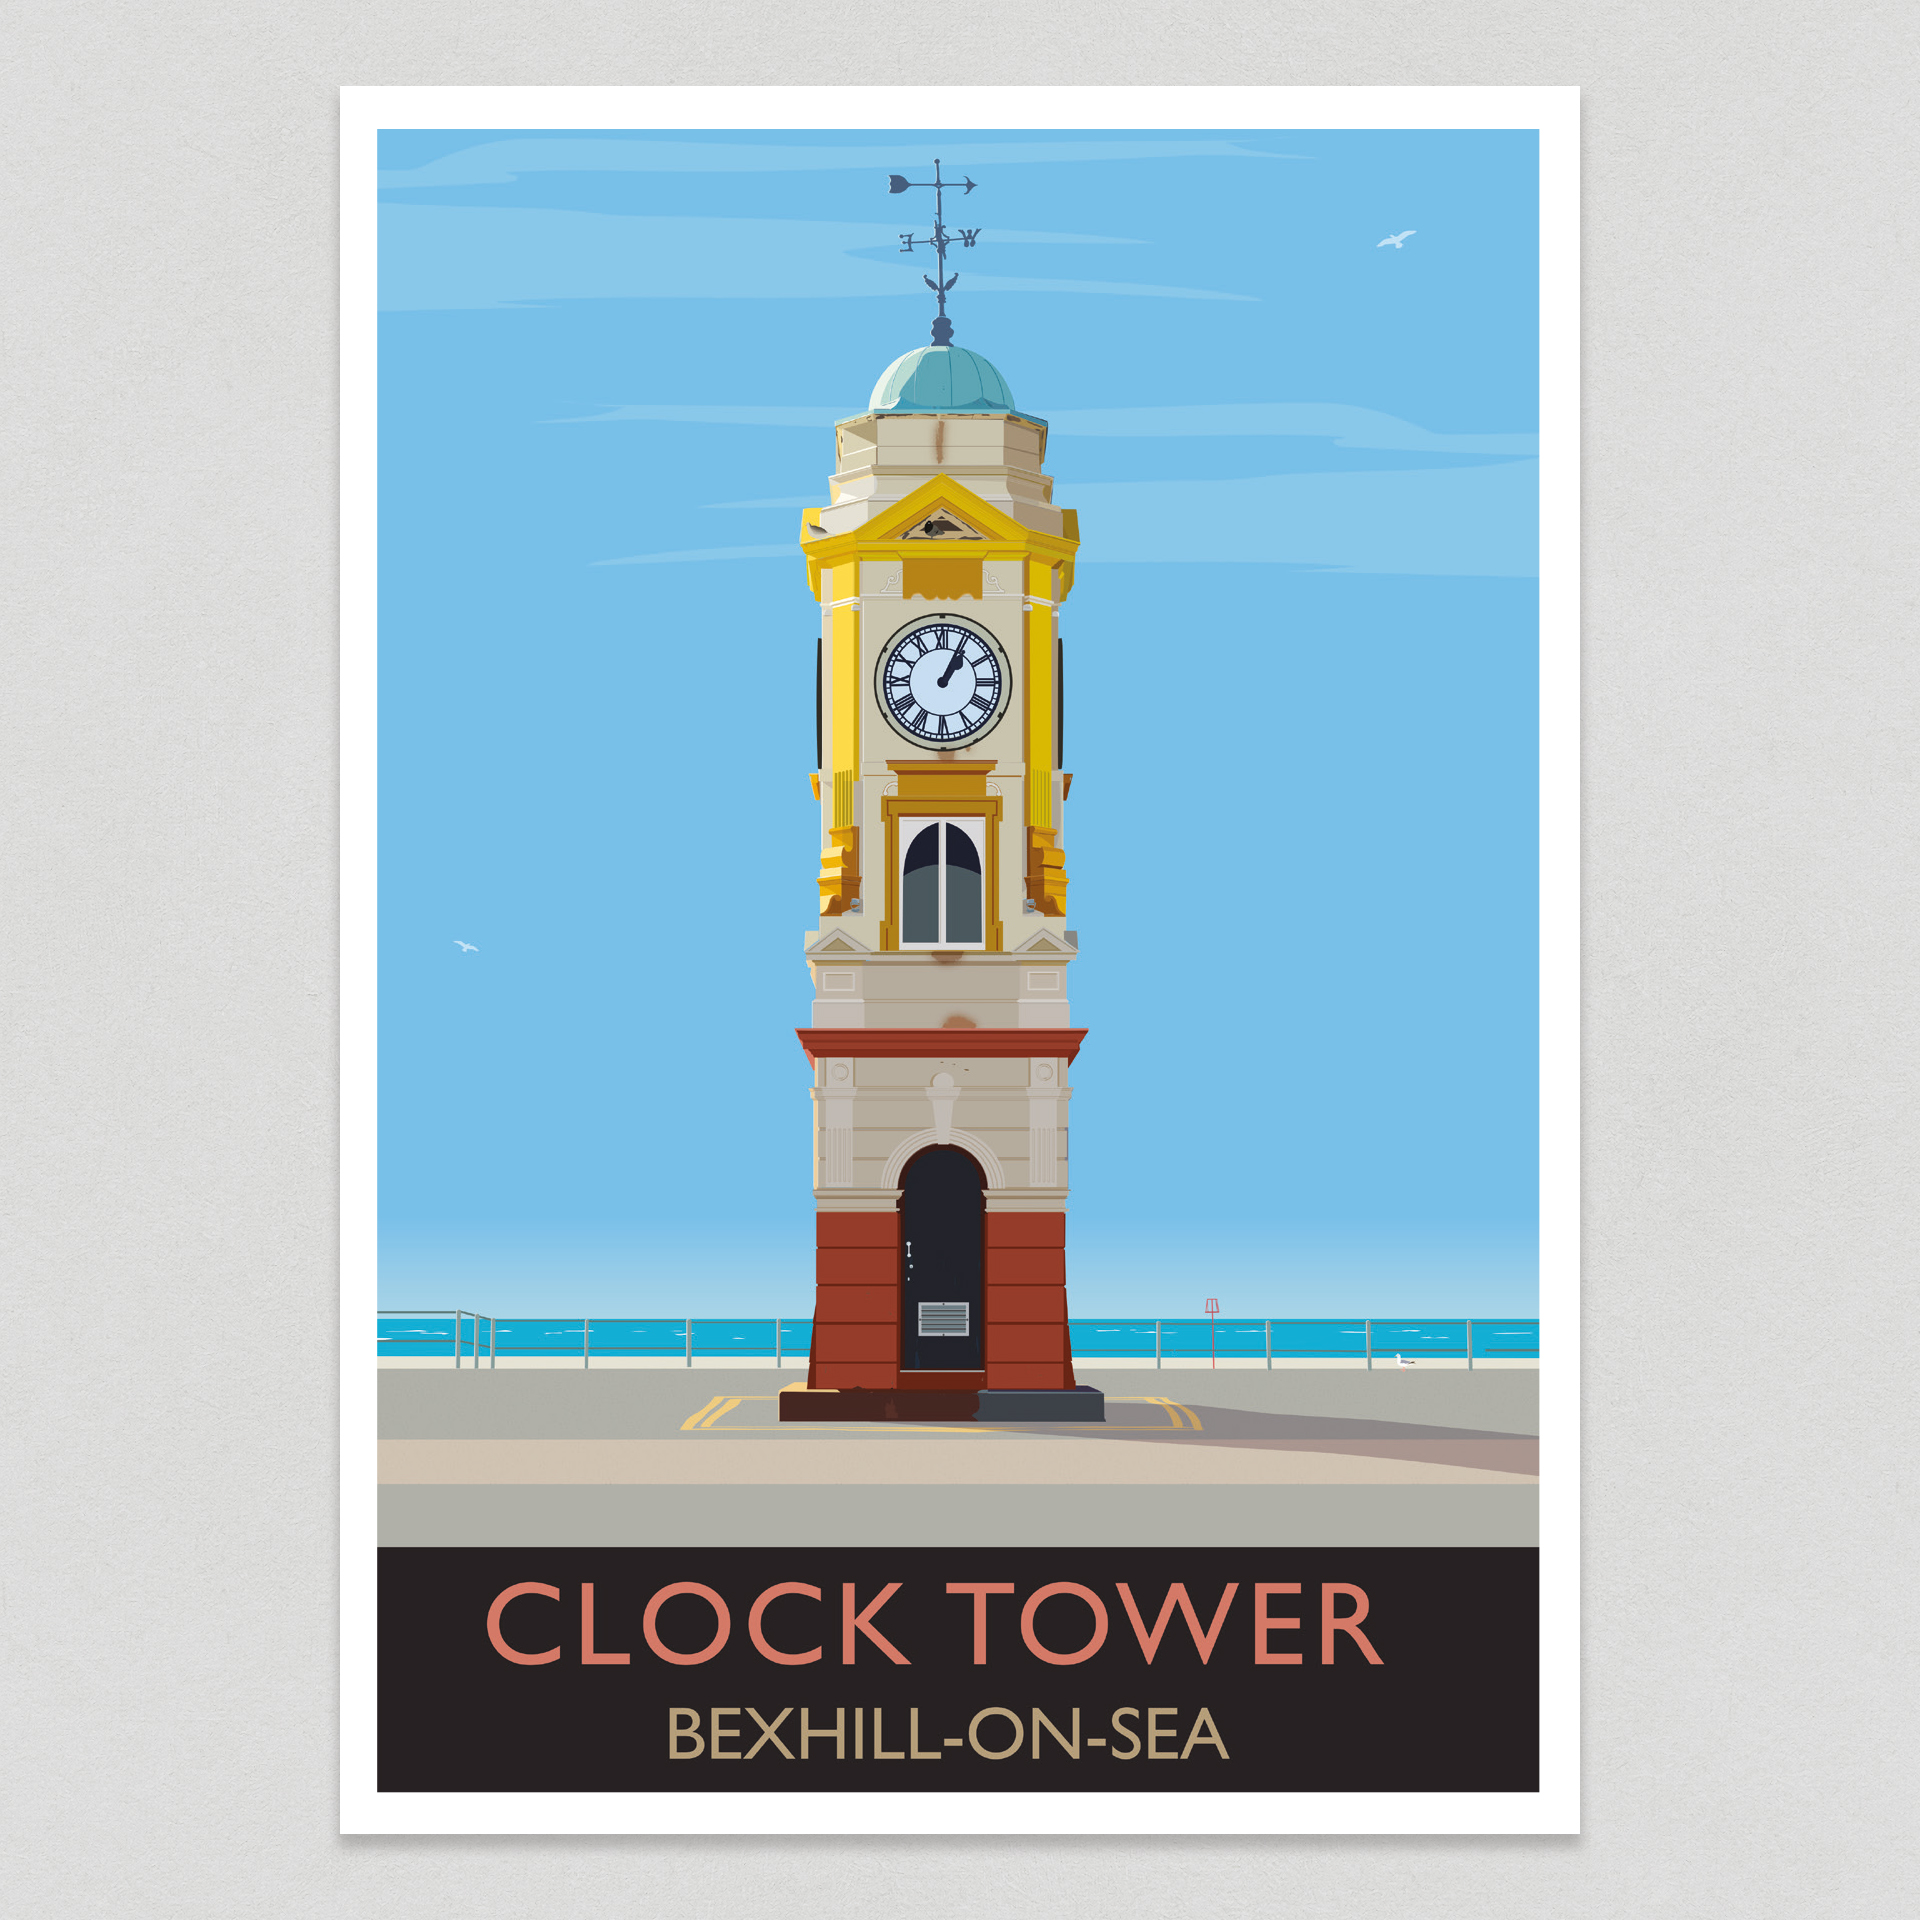 6 x Bexhill Clock Tower Postcards